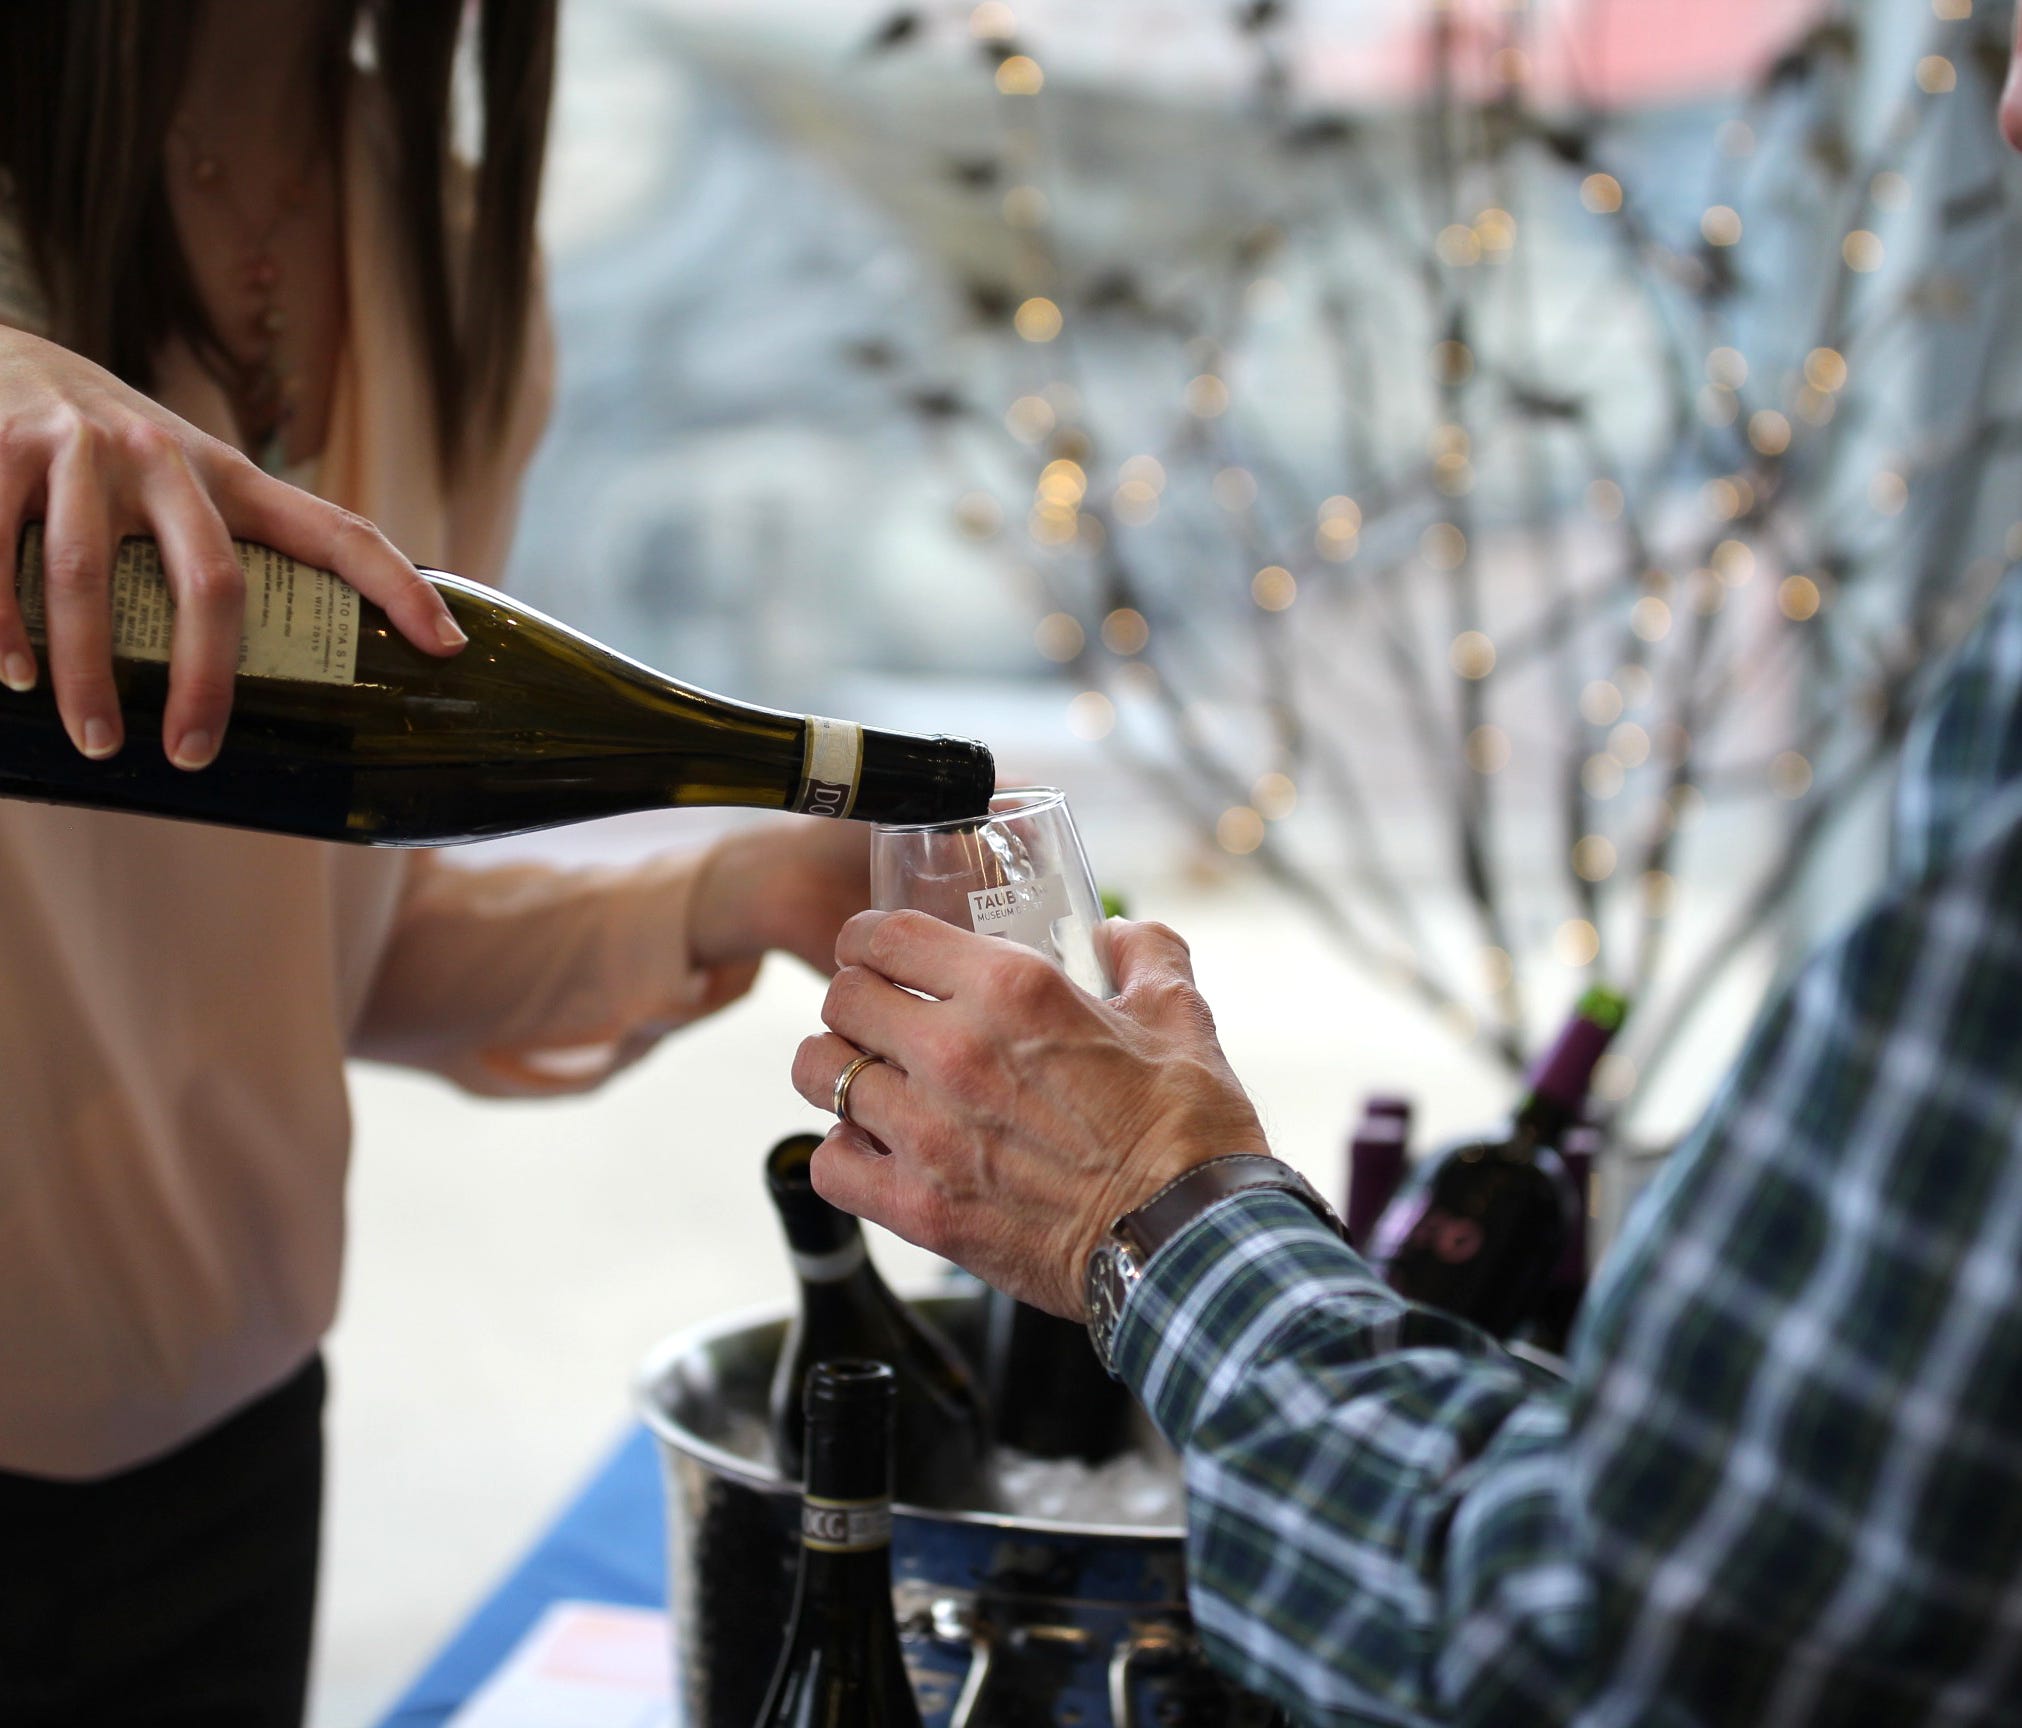 In Roanoke, Va., the Taubman Museum of Art hosts three winter festivals. On January 18, Wine + Dine includes a guided tour of galleries, a wine reception, a multi-course meal and live music.